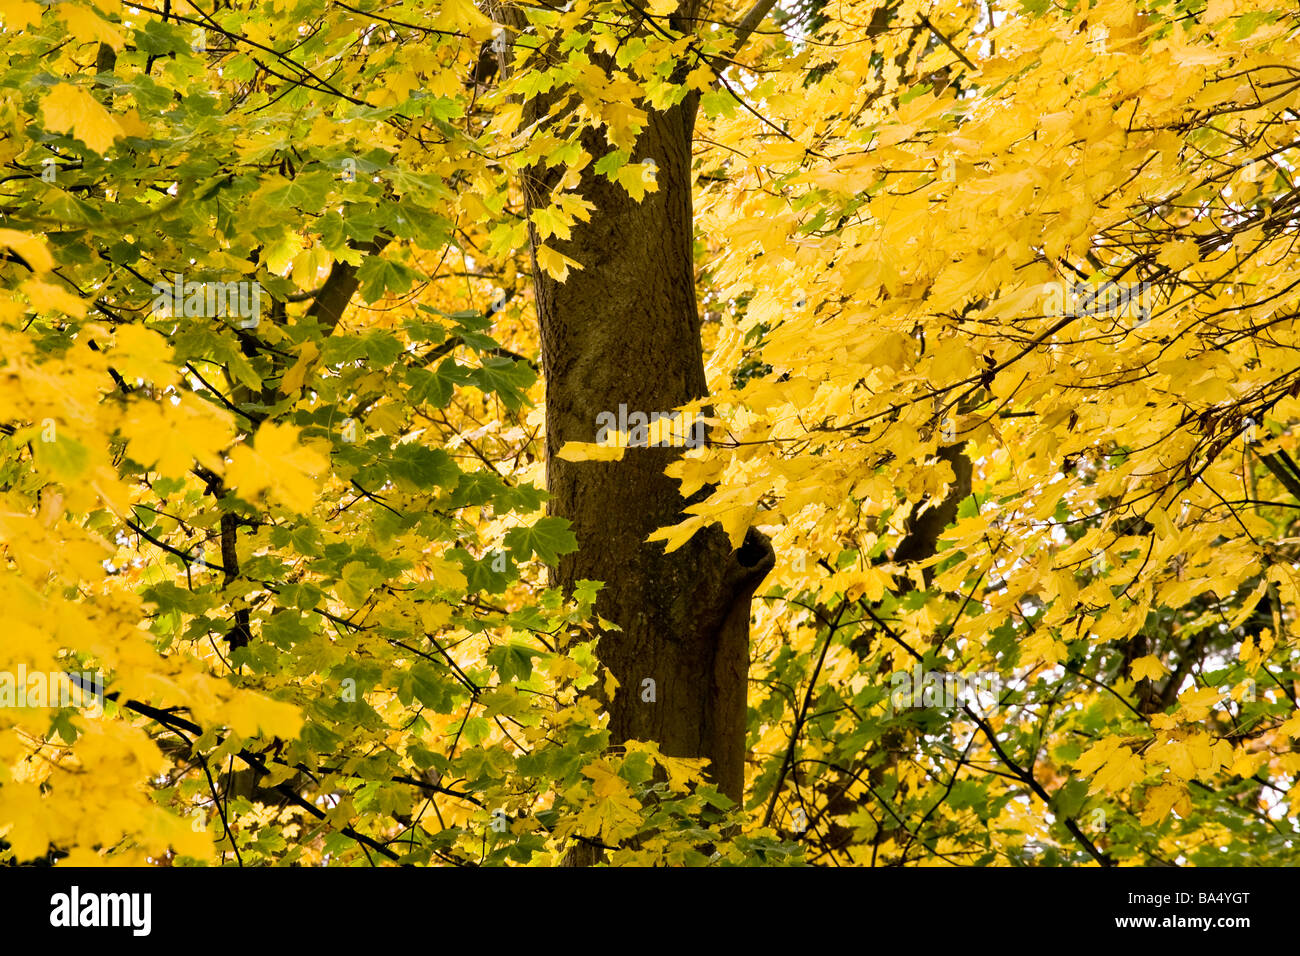 Tree surrounded by colourful yellow leaves in autumn Stock Photo